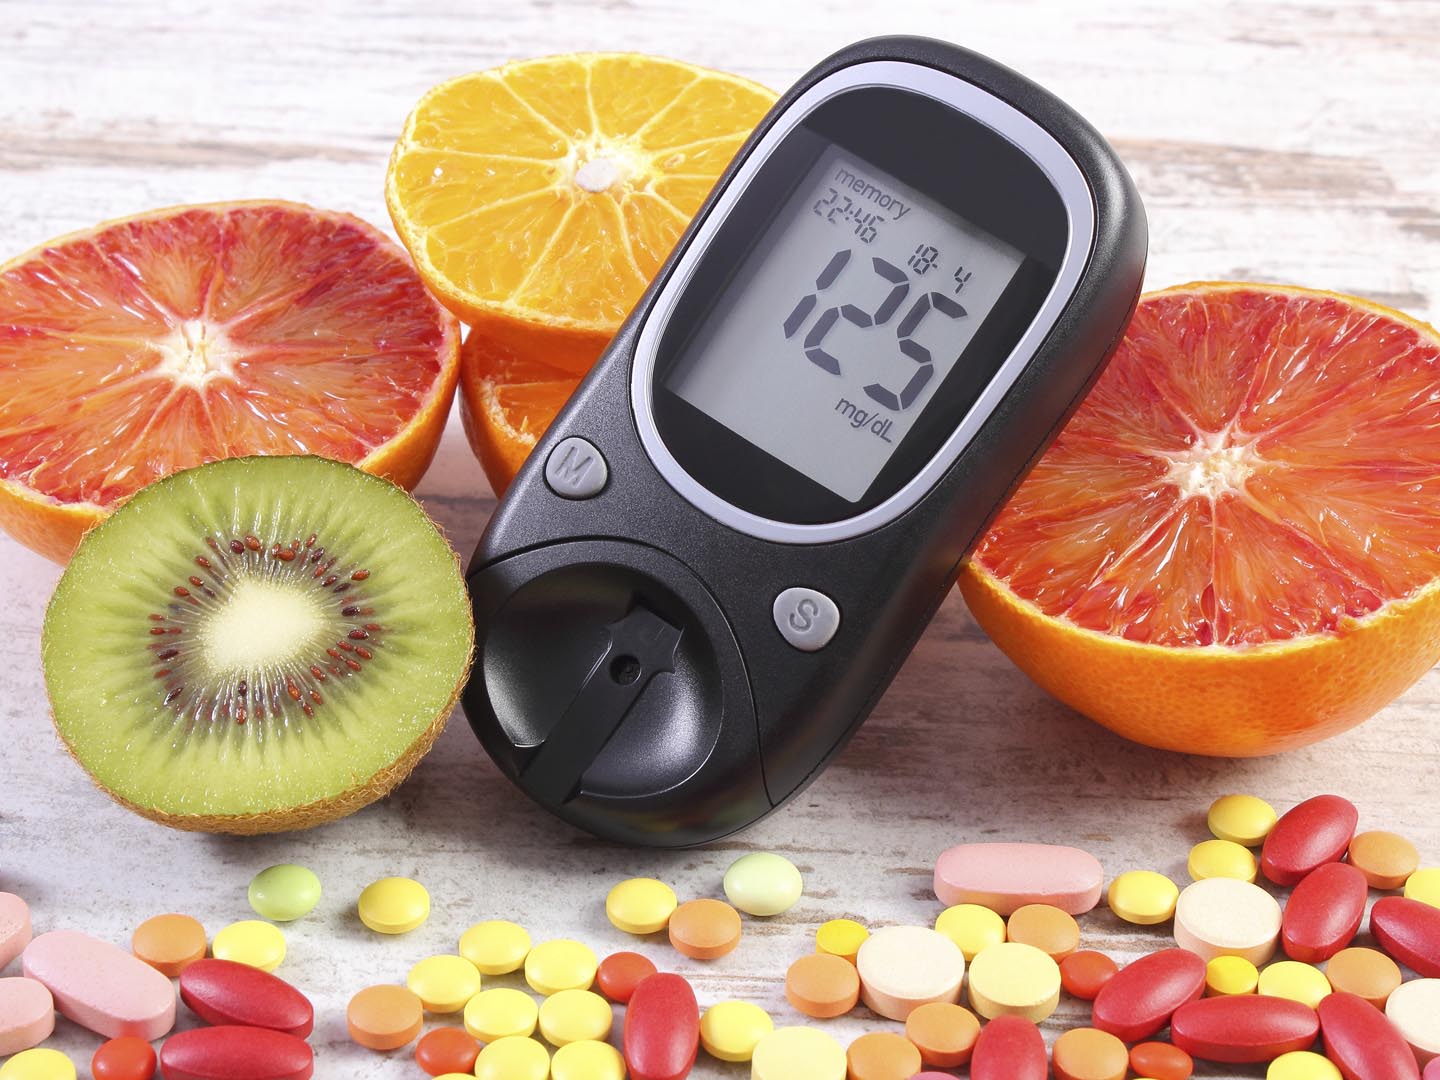 Glucose meter with result of measurement sugar level, fresh natural fruits and medical pills, tablets and supplements, concept of diabetes, healthy lifestyle and nutrition